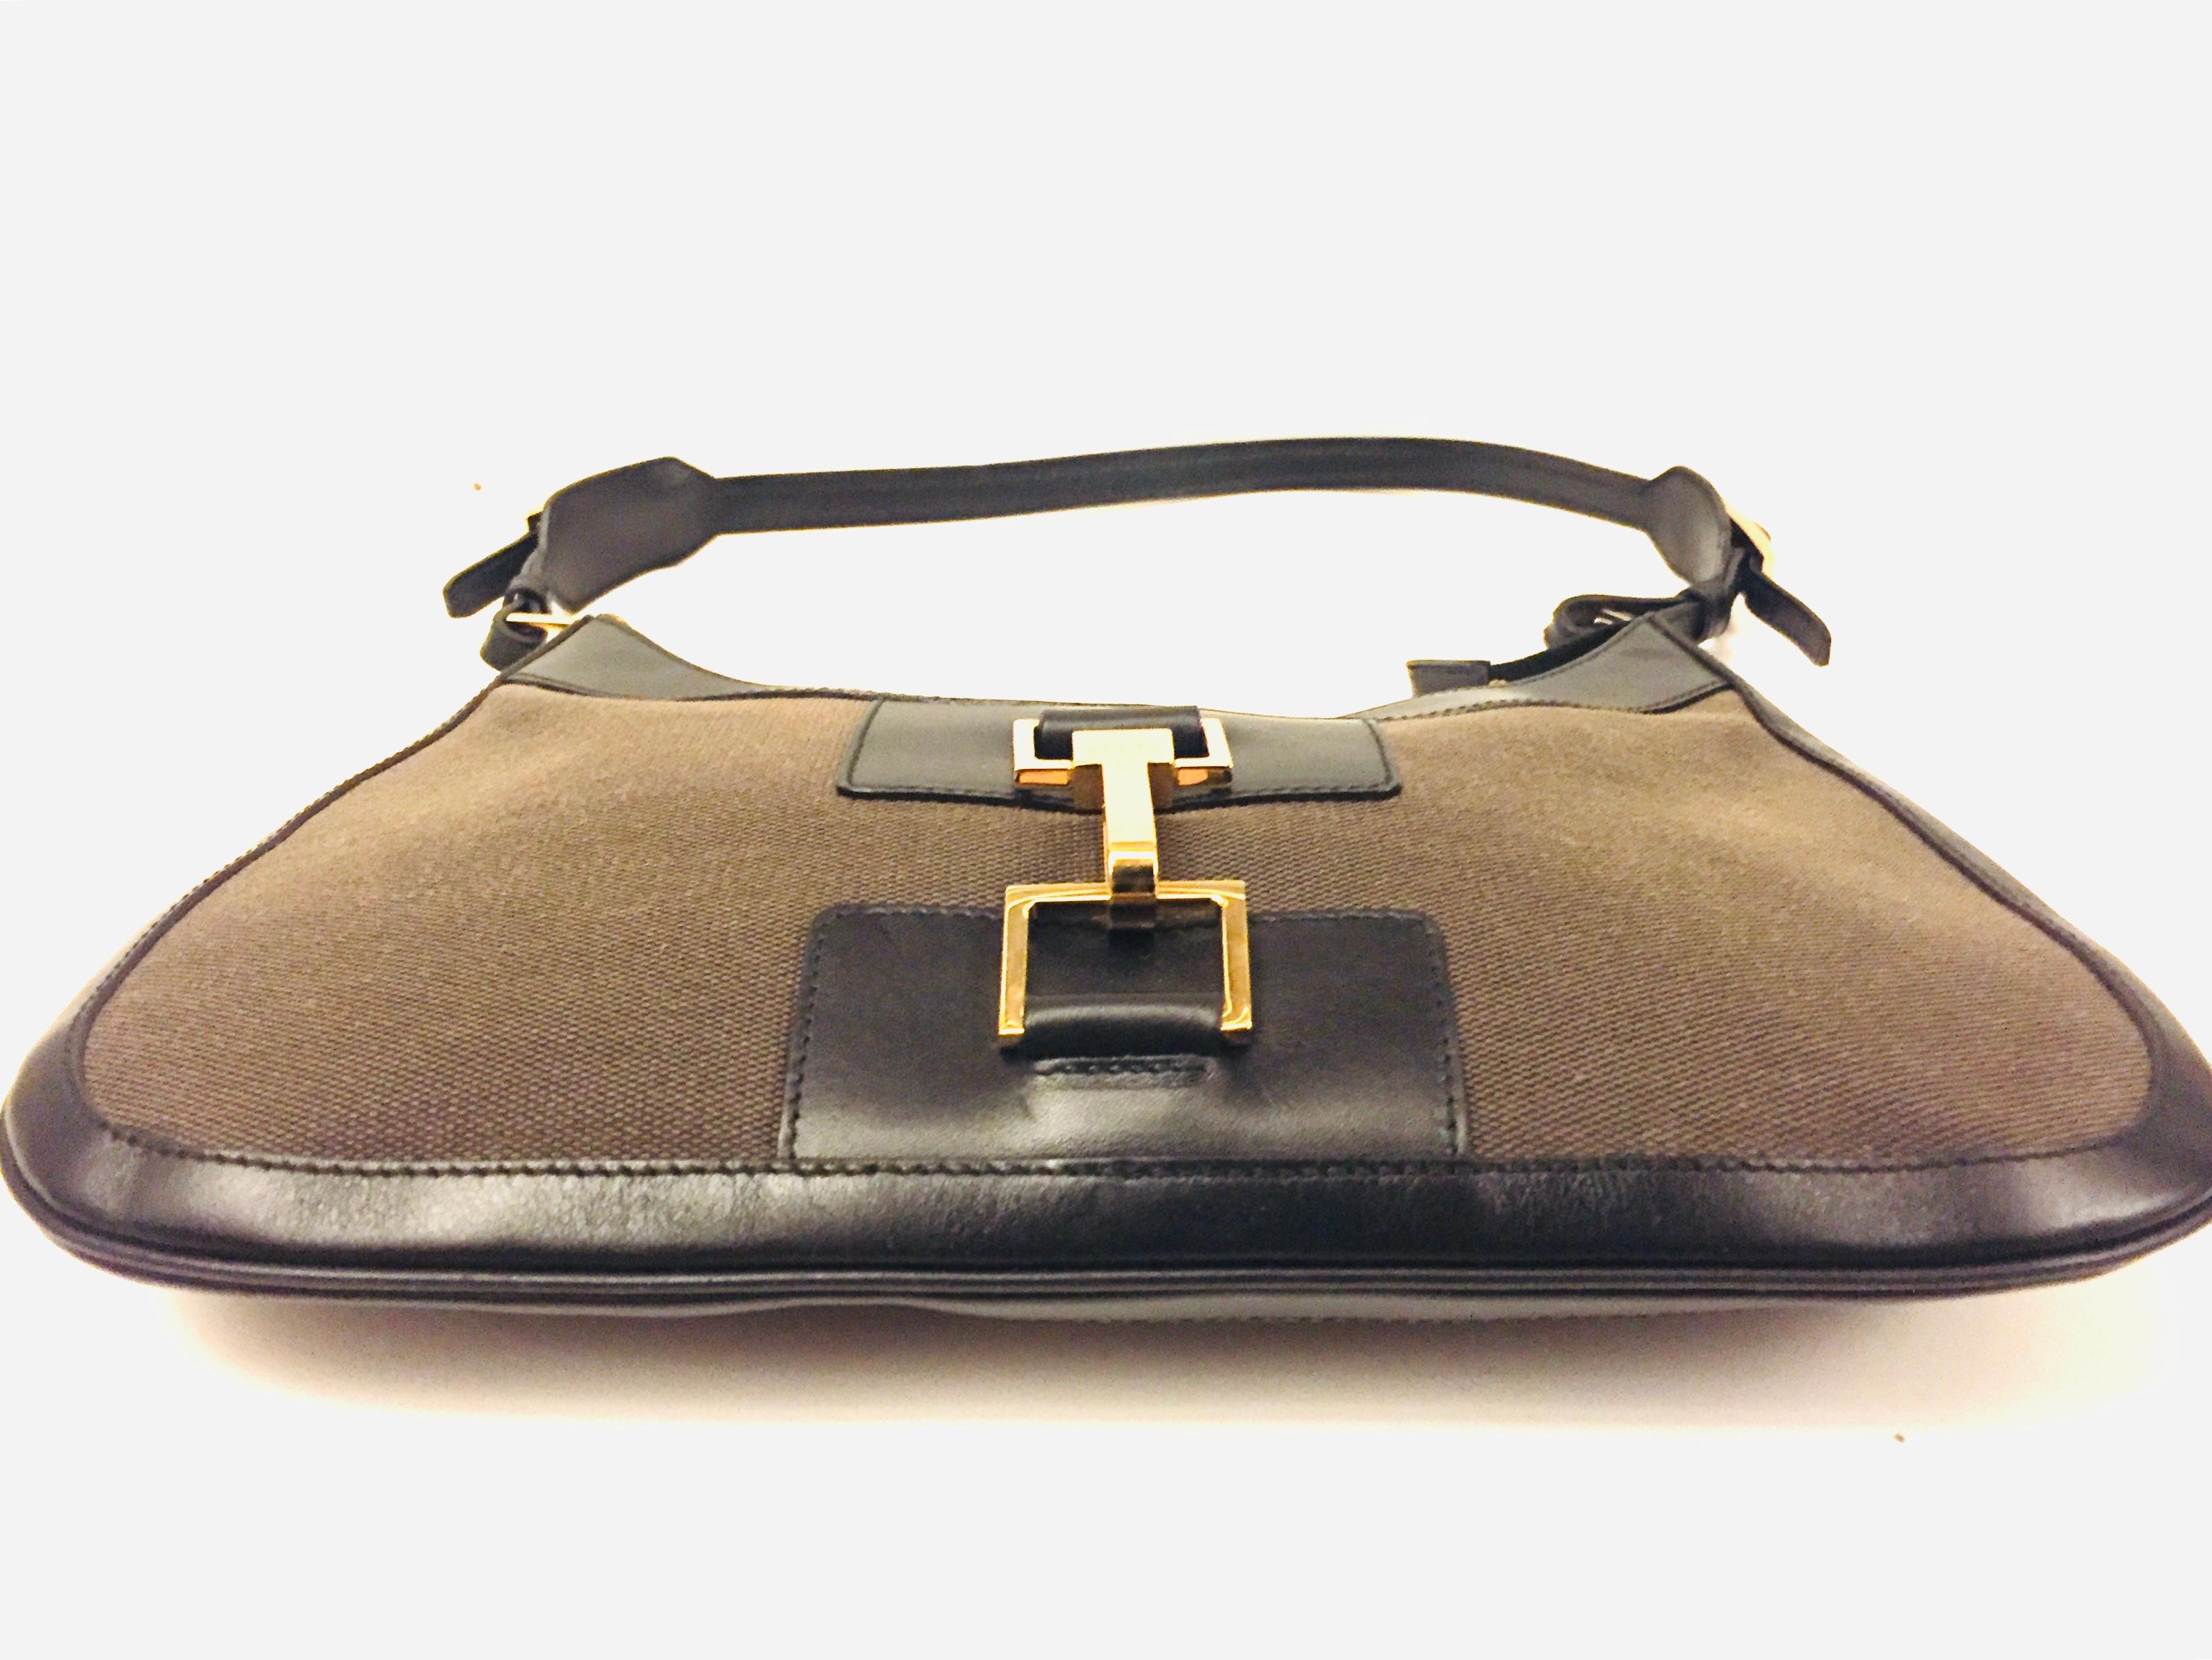 Gucci black leather and brown canvas hobo style bag 2